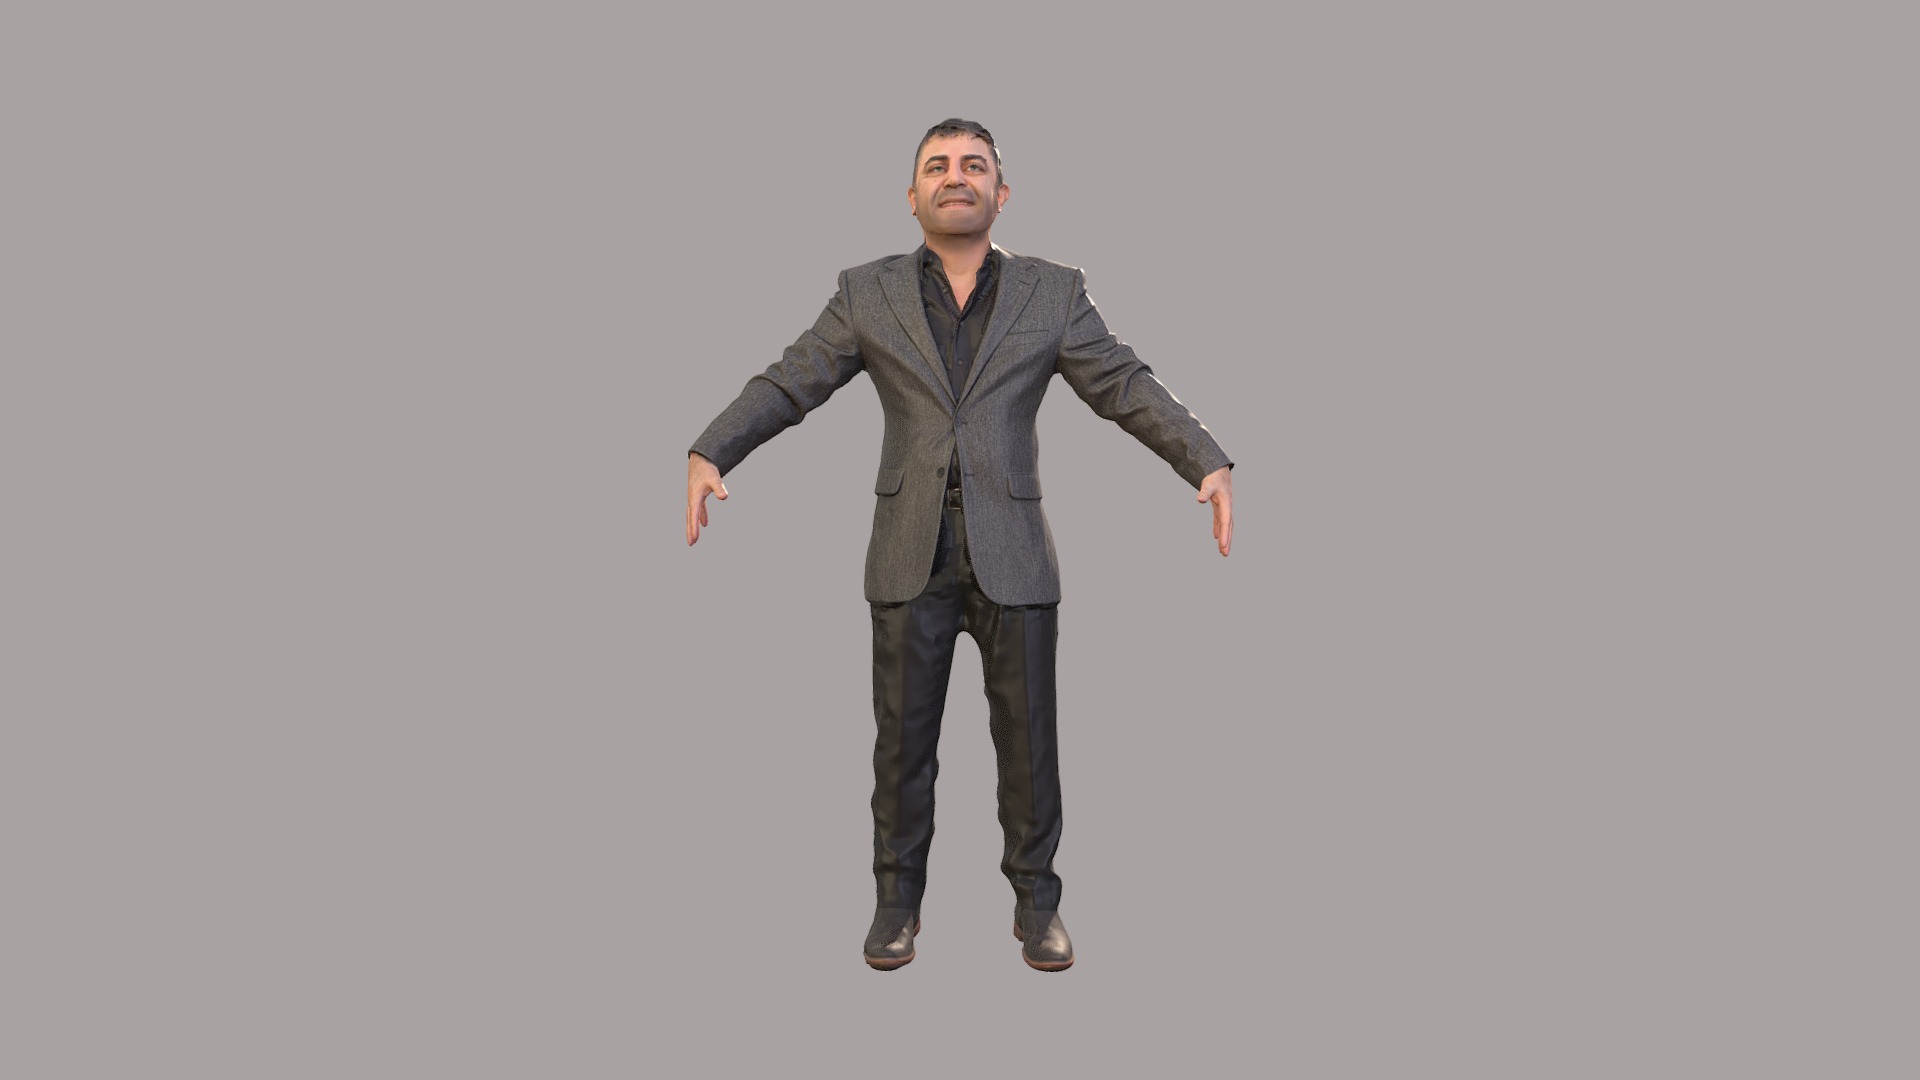 3D model Person 2 – A Pose - This is a 3D model of the Person 2 - A Pose. The 3D model is about a man in a suit.